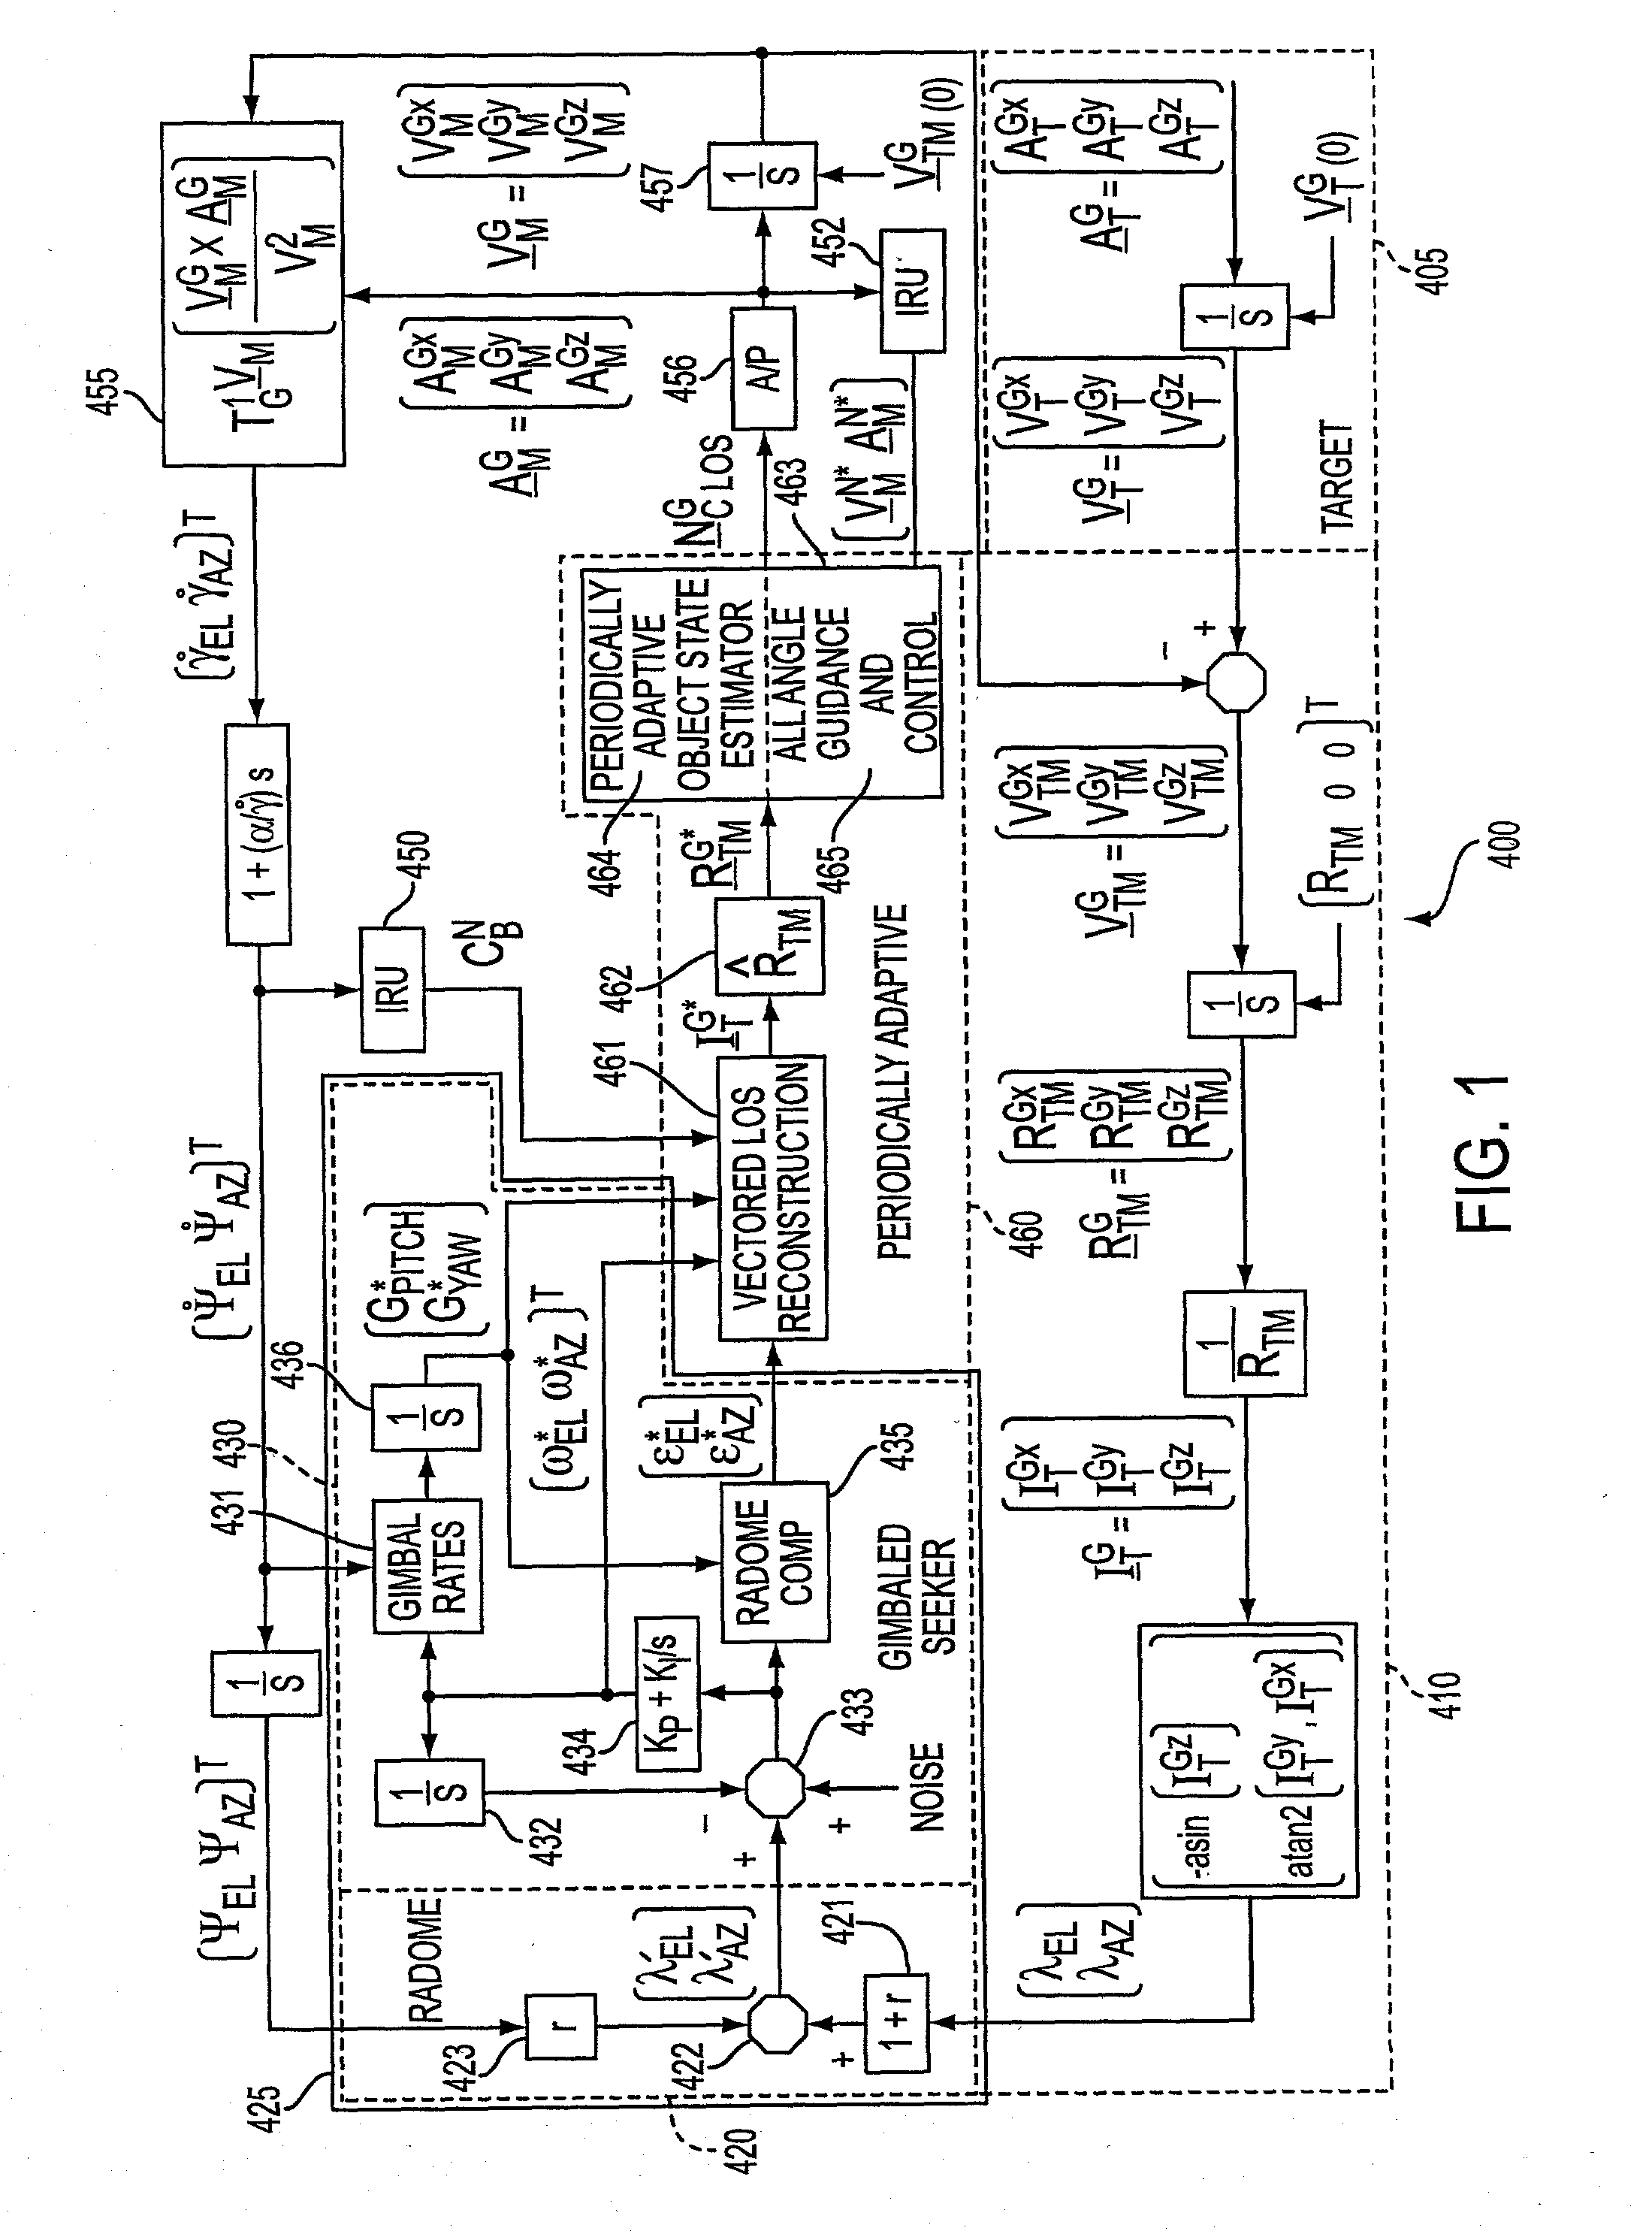 System and method for periodically adaptive guidance and control